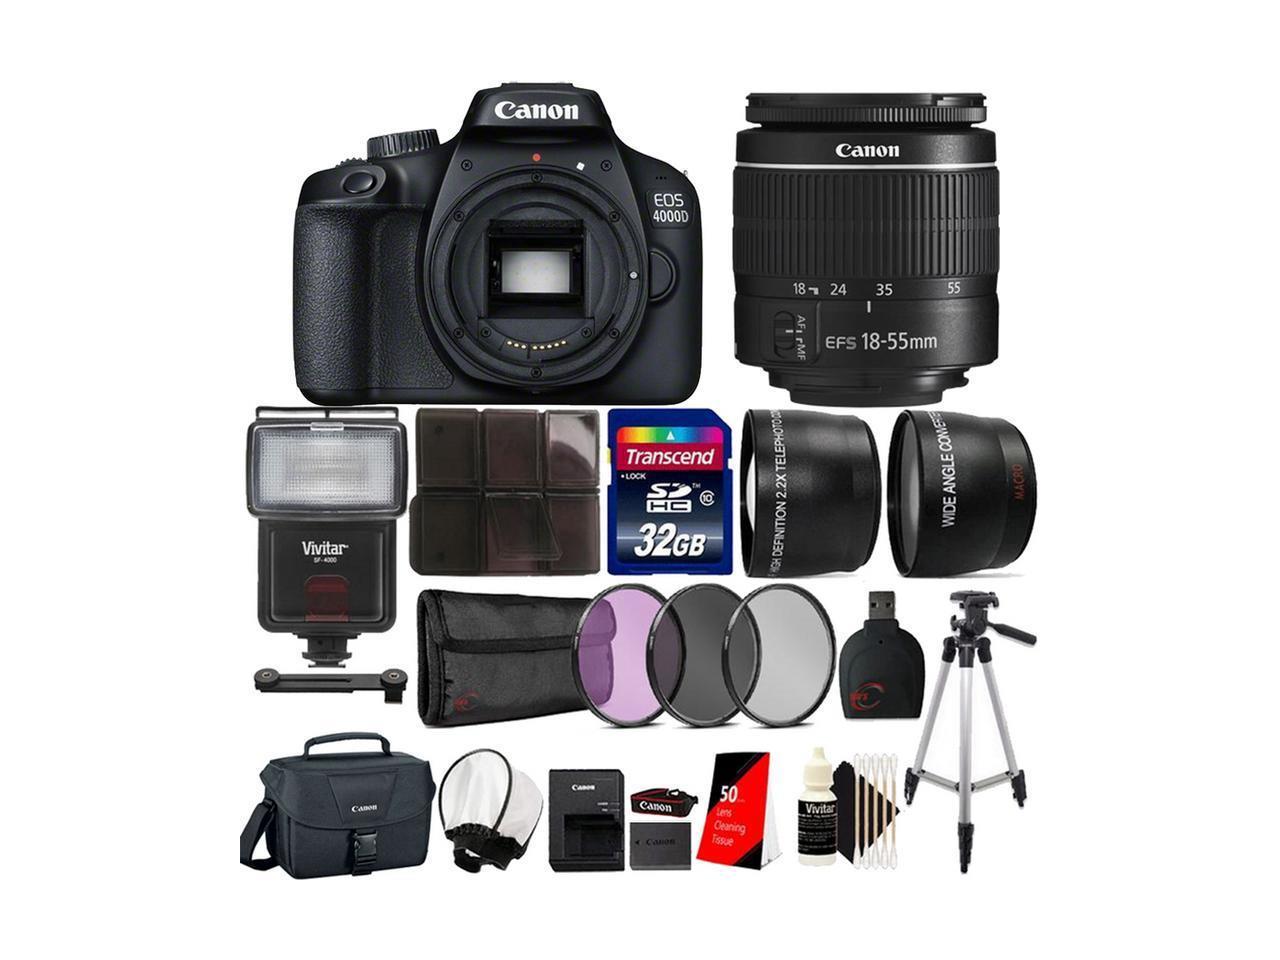 Canon EOS 4000D 18MP Wi-Fi / NFC DSLR Camera with 18-55mm lens + SF-4000 Ultimate Accessory Kit